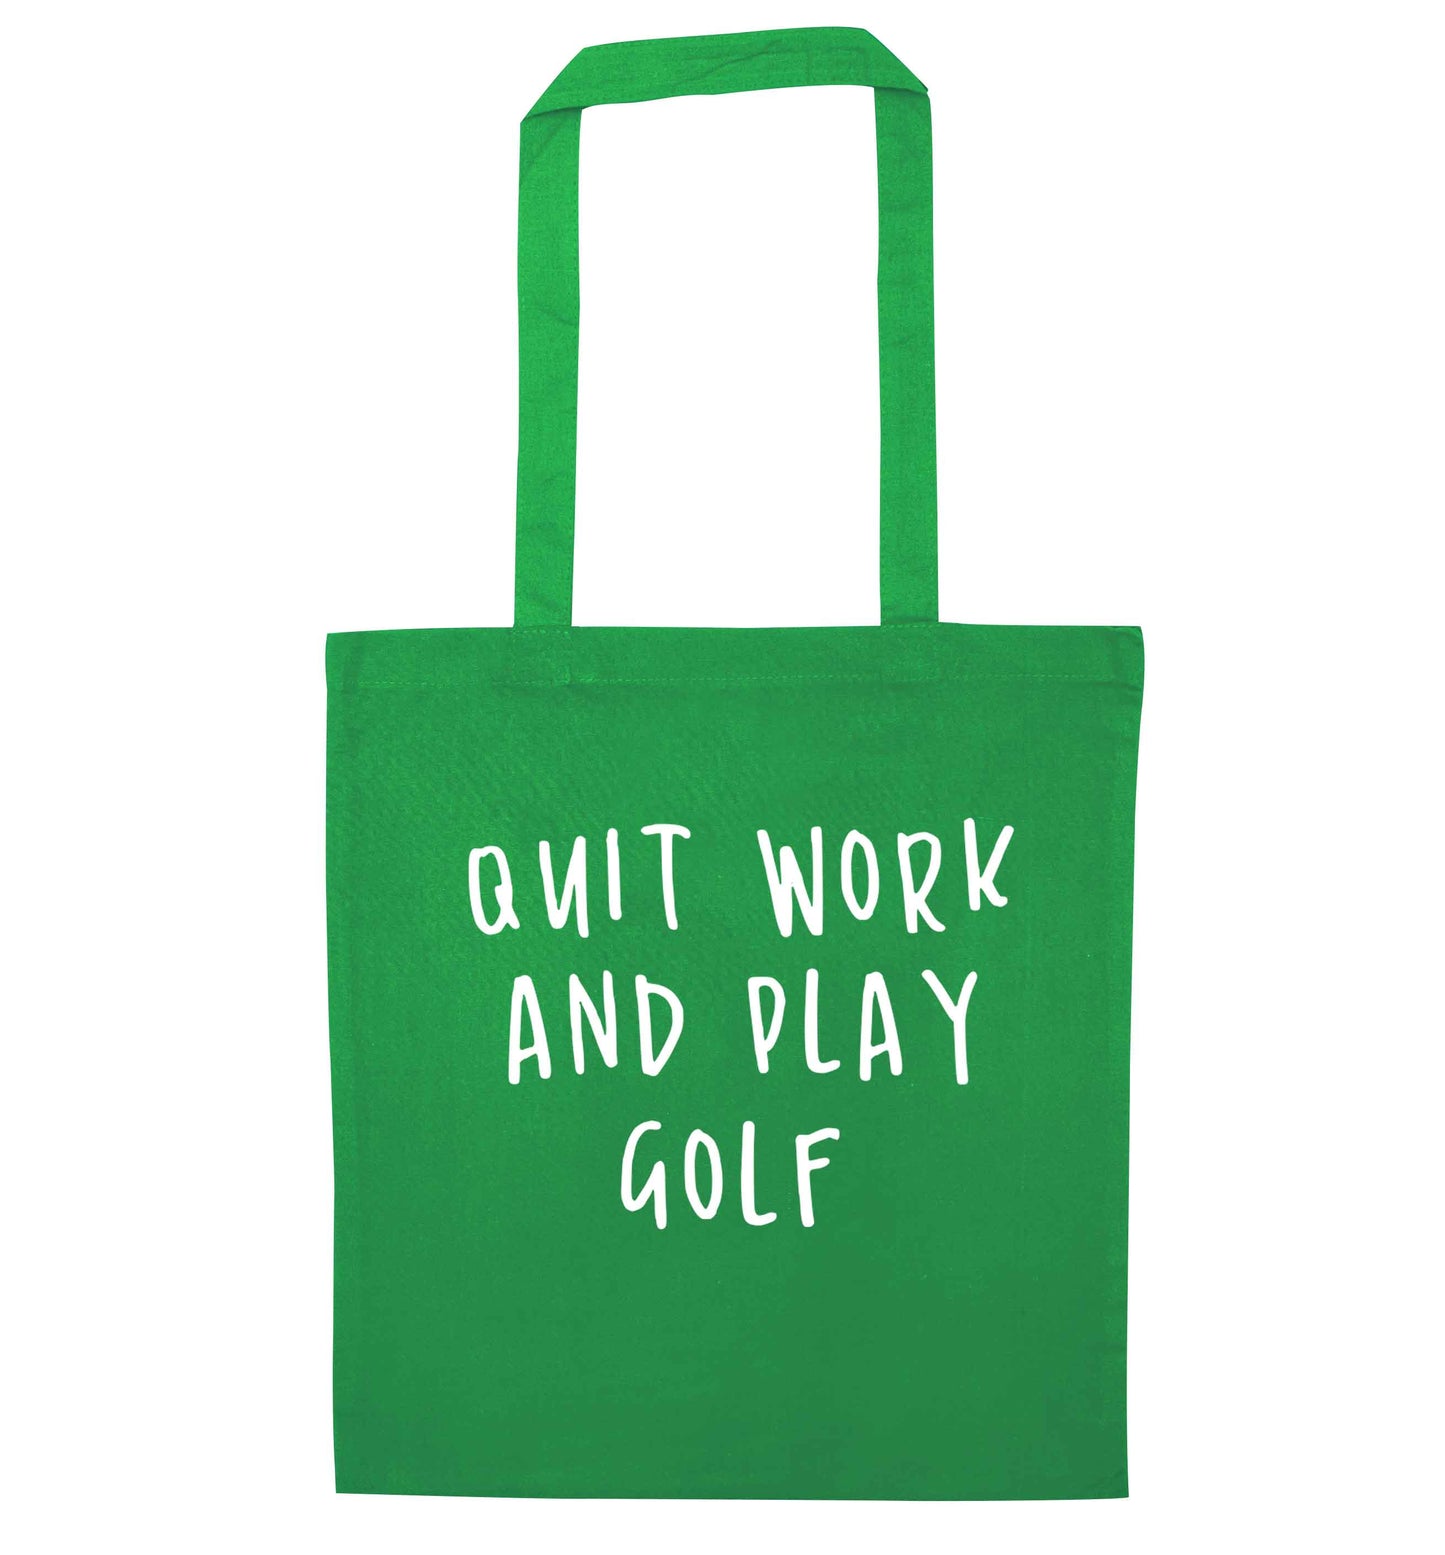 Quit work and play golf green tote bag